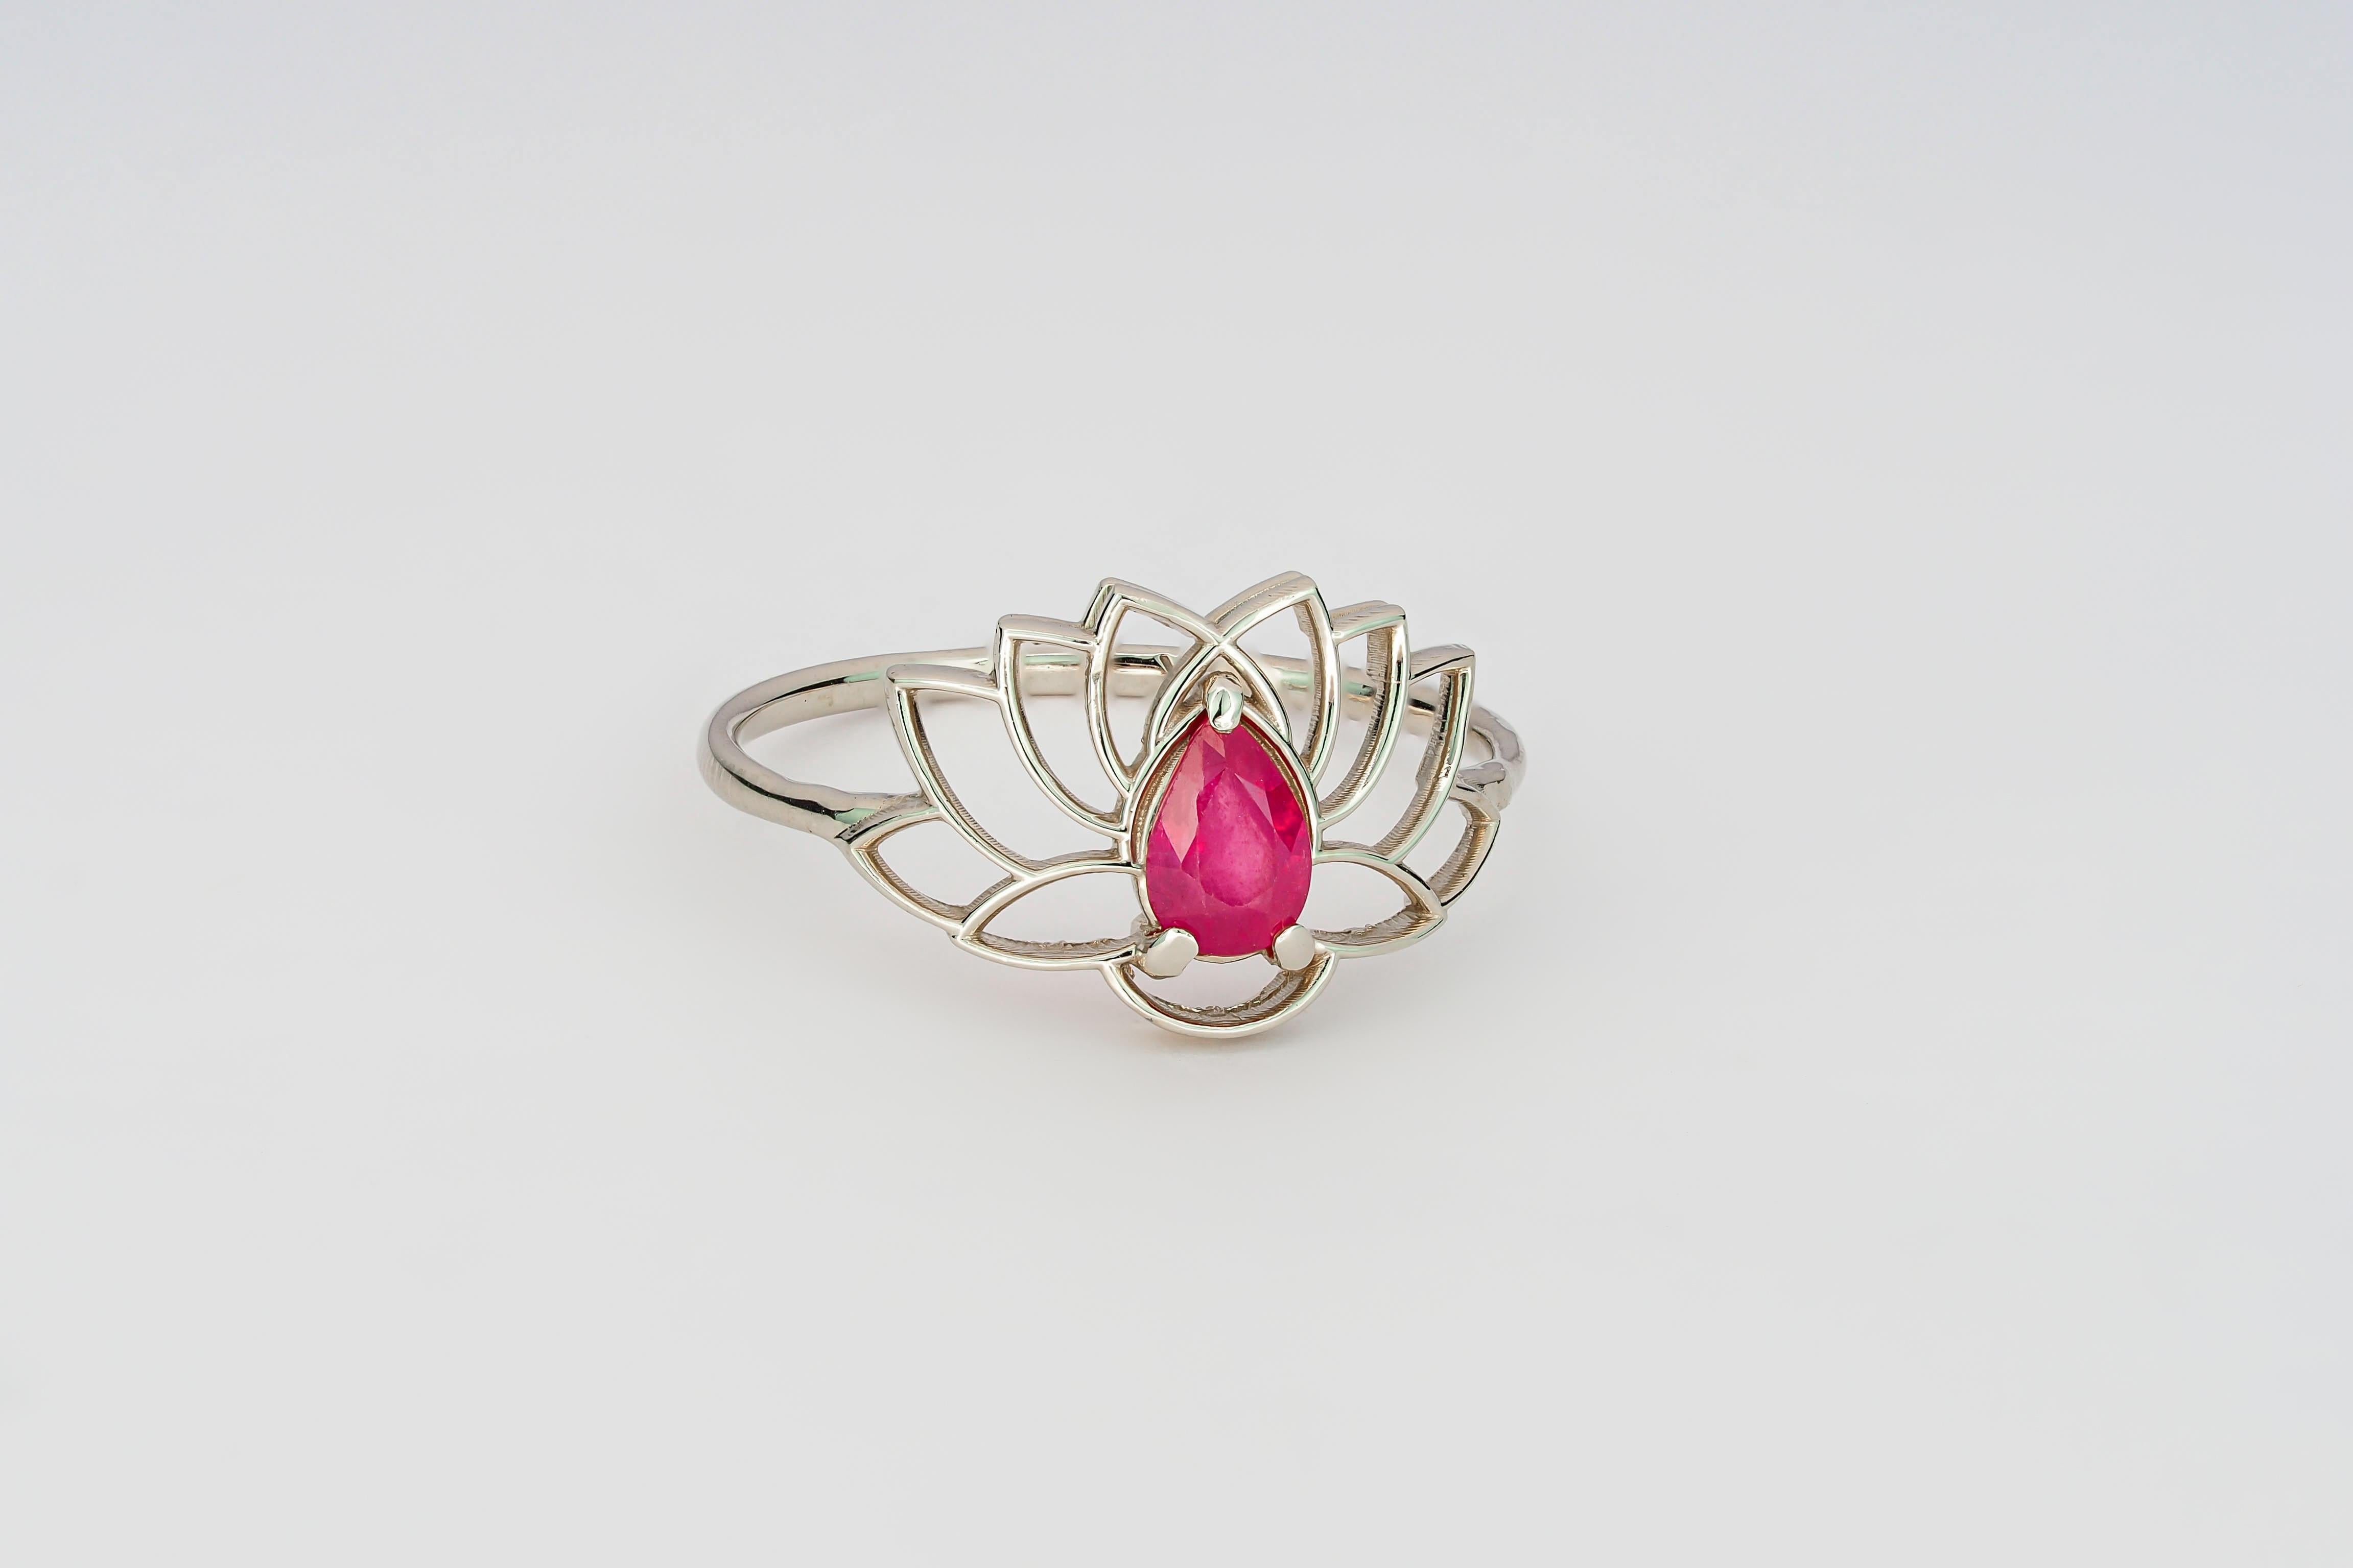 Modern Lily ring with ruby in 14k gold.  For Sale